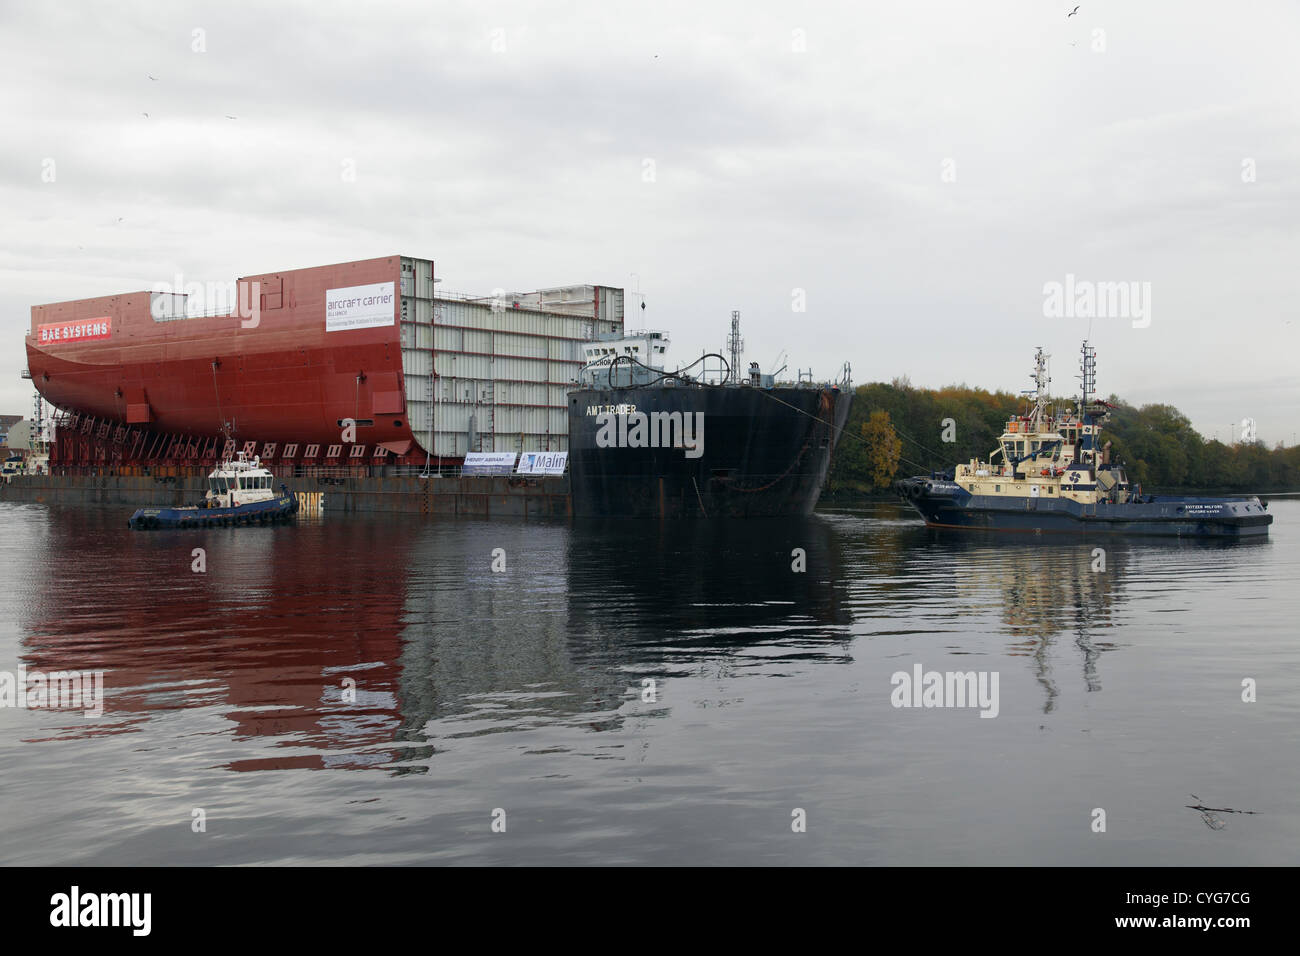 BAE Systems, Govan, Glasgow, Scotland, UK, Sunday, 4th November, 2012. A completed section of hull for the Royal Navy Aircraft Carrier HMS Queen Elizabeth departs on the barge AMT Trader, sailing on the River Clyde Stock Photo